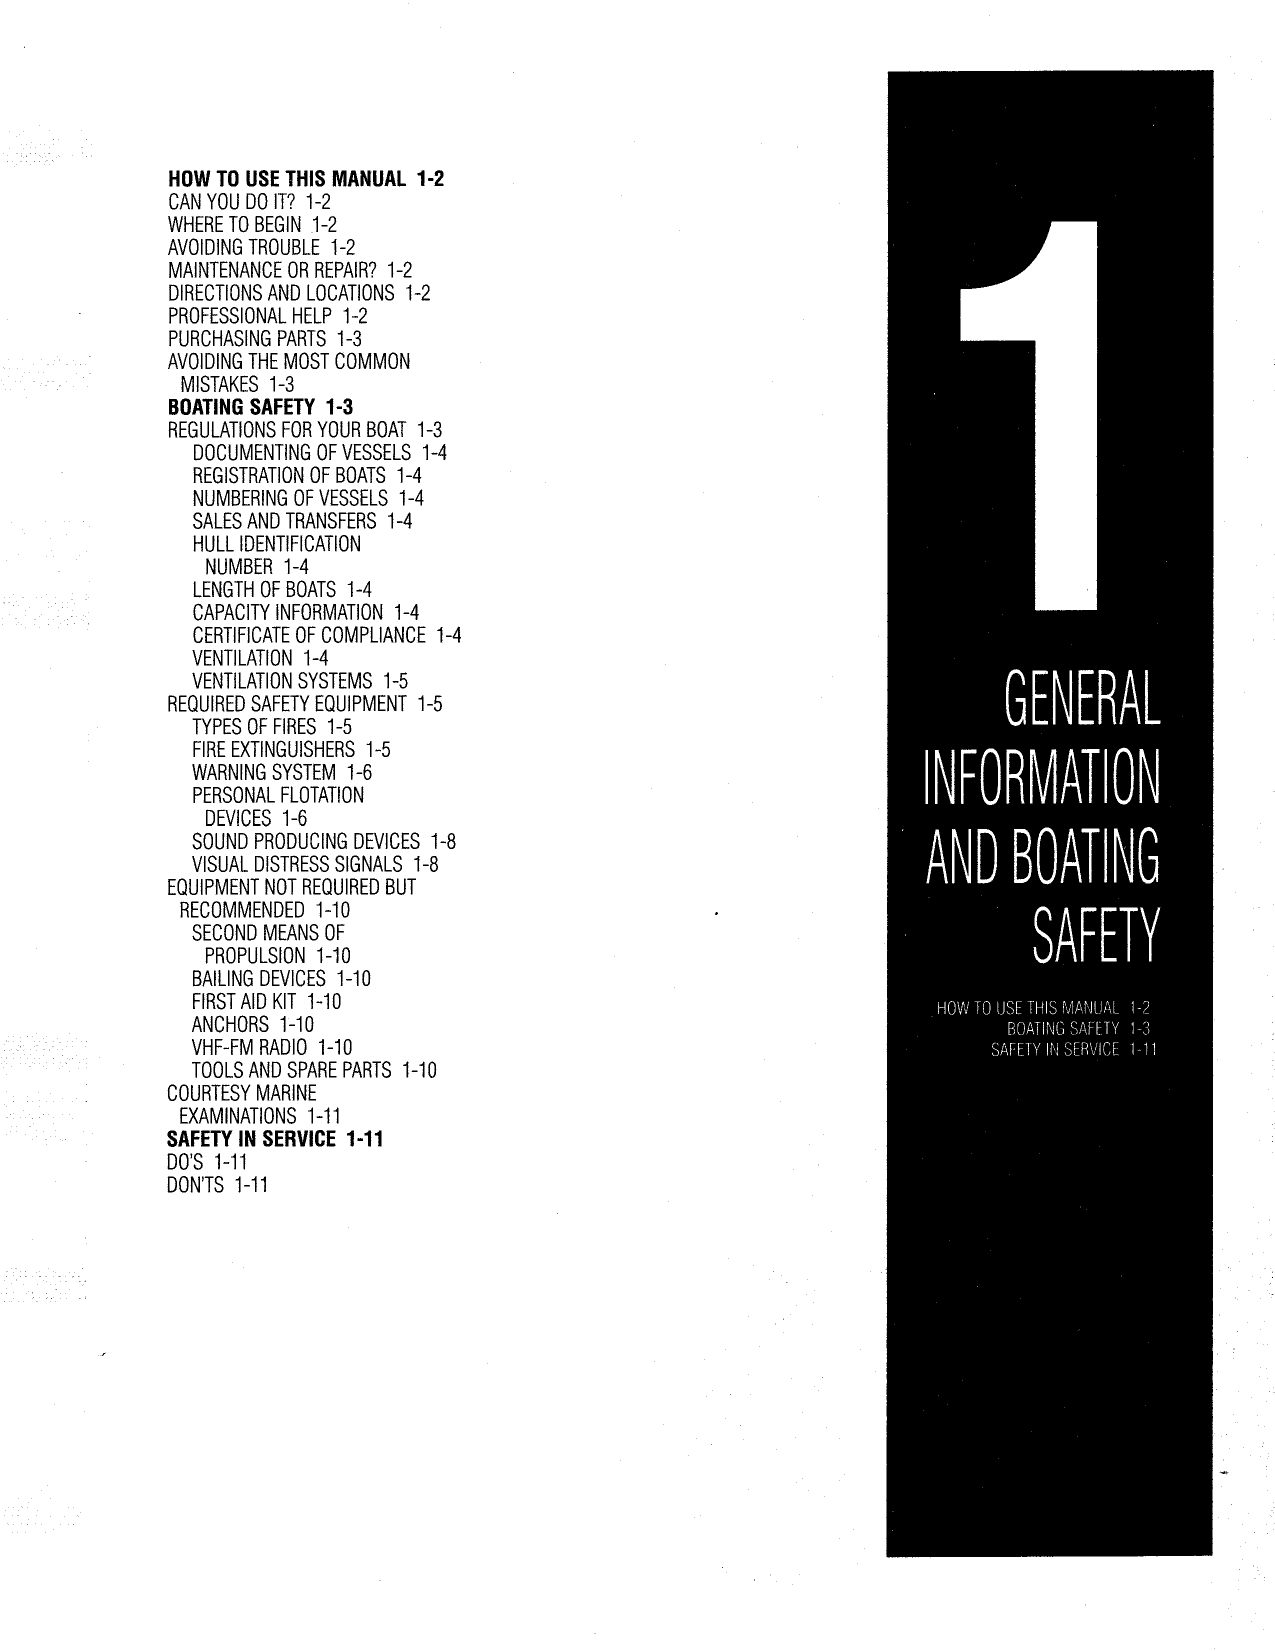 1978-2001 Honda 2hp-130hp outboard engine service manual Preview image 3